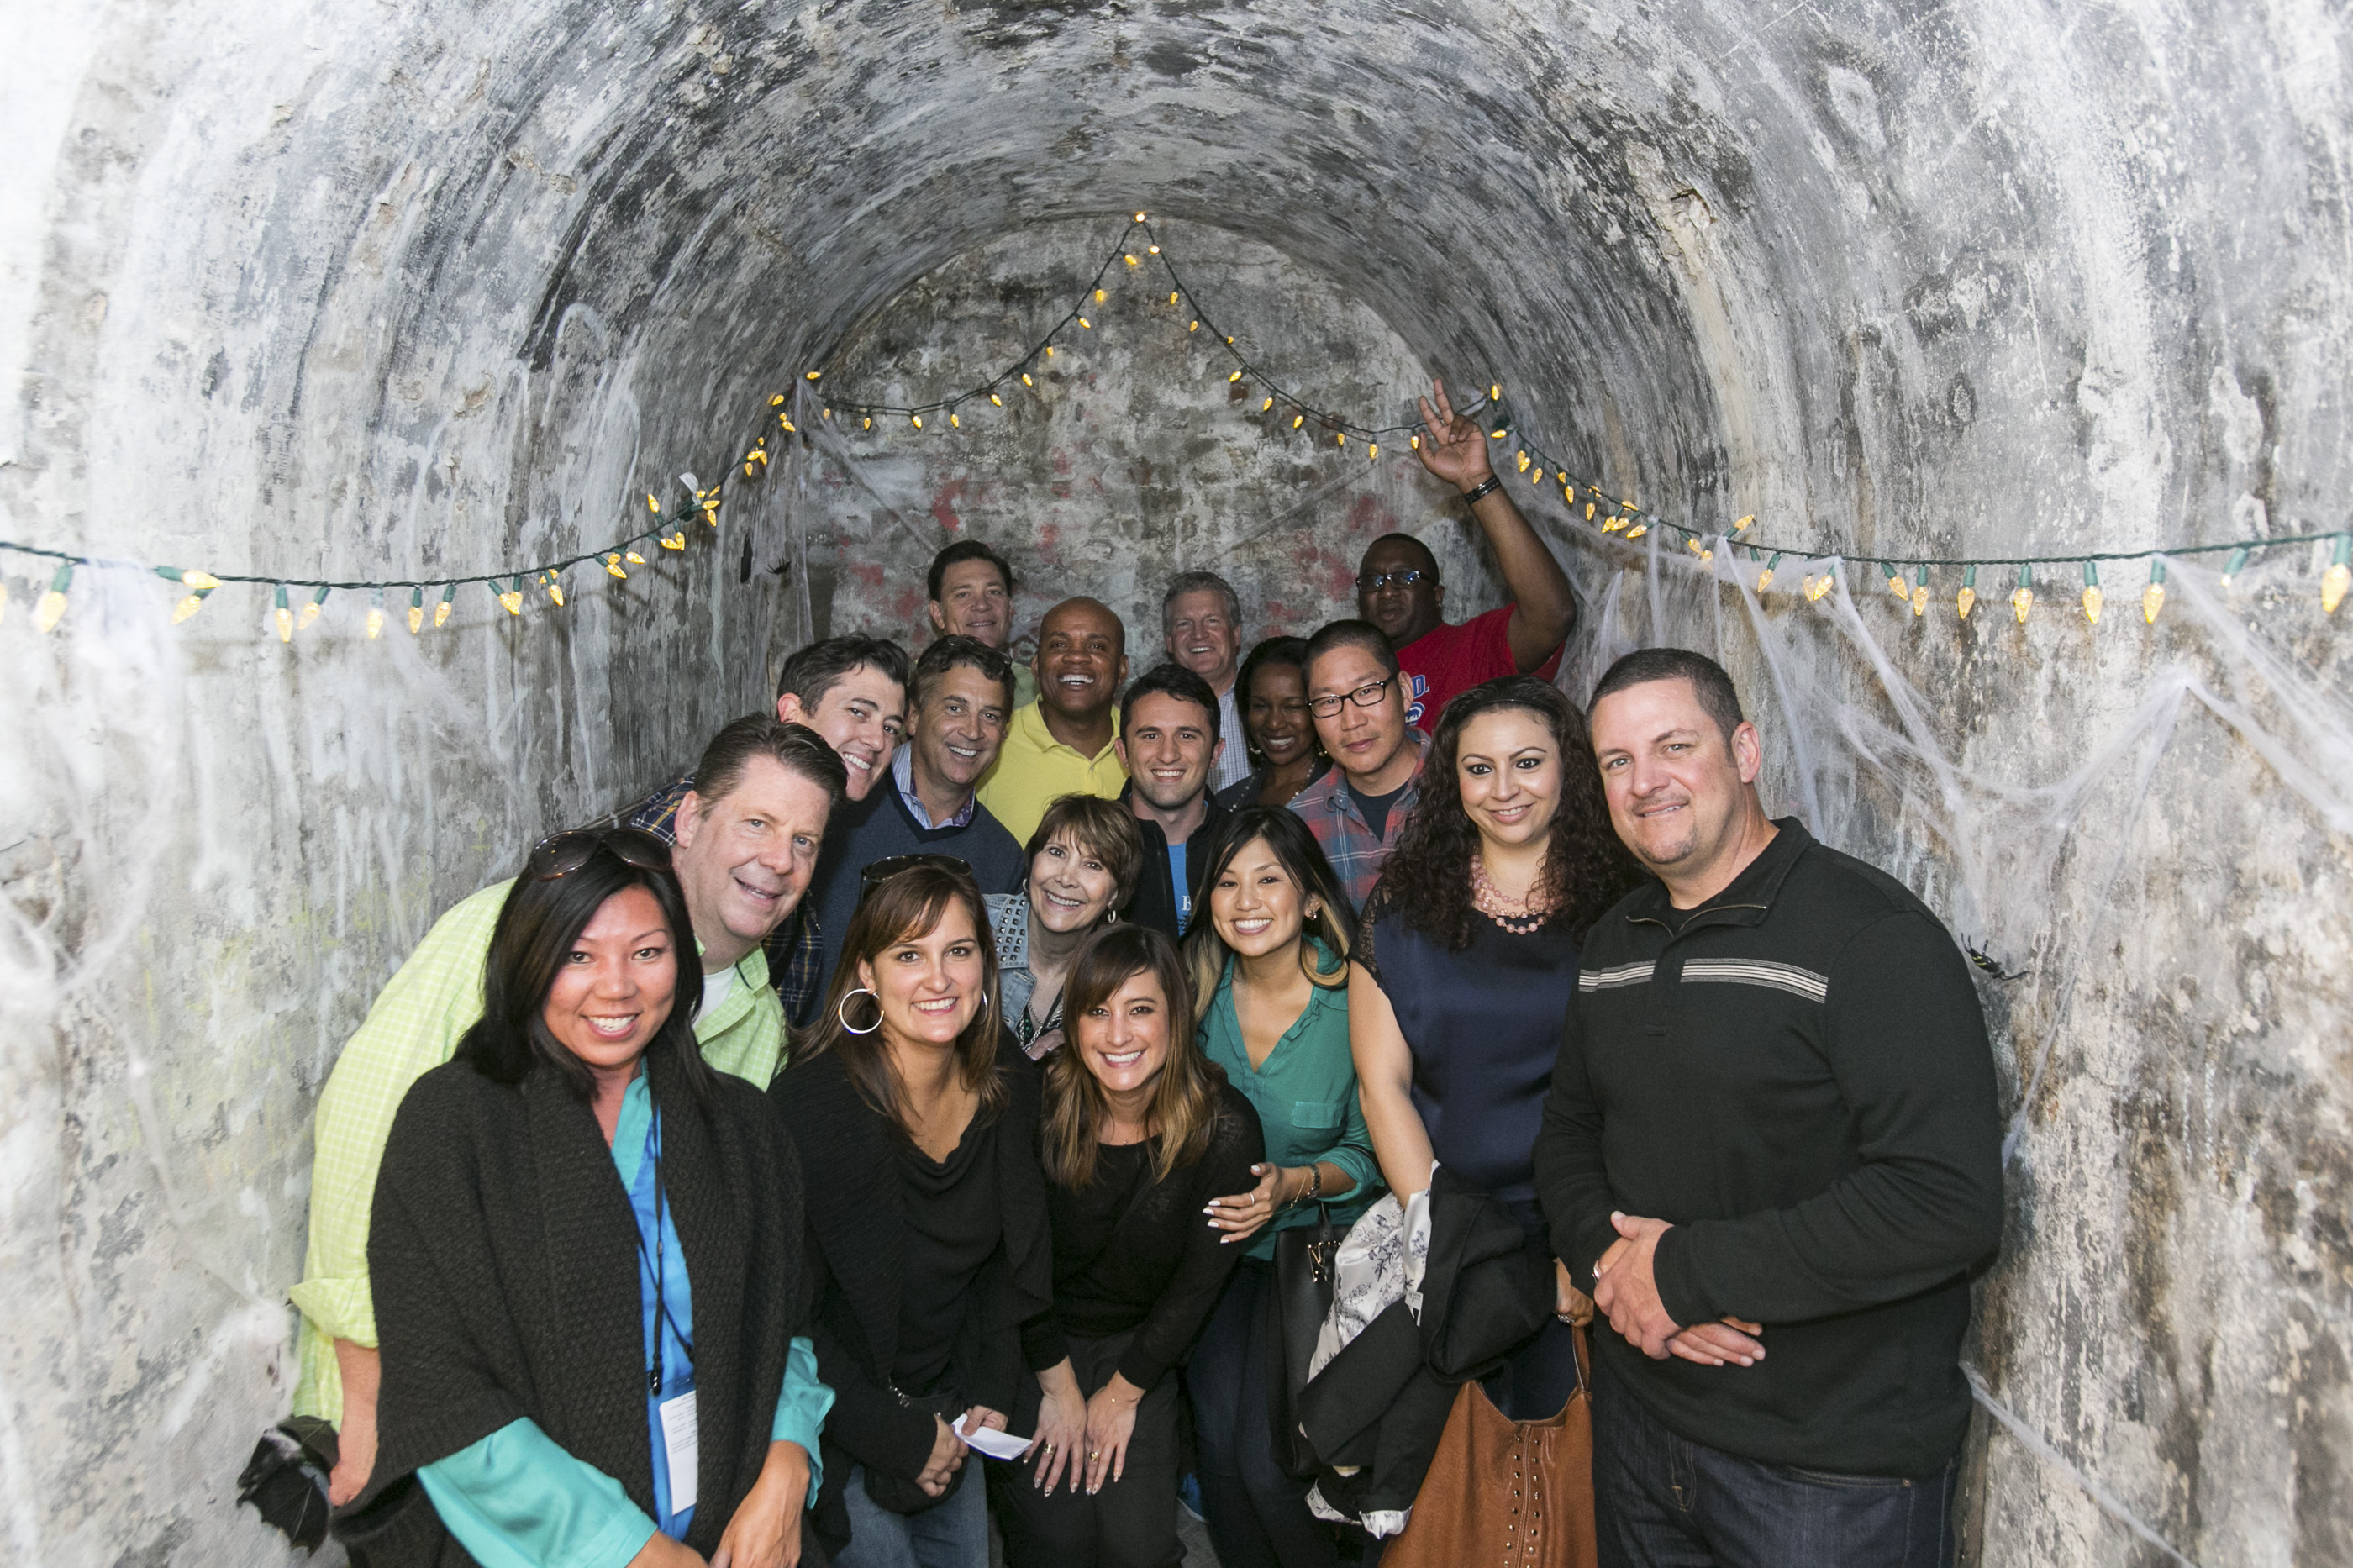 Team Building Activities For Big Groups in San Francisco: take a food tour